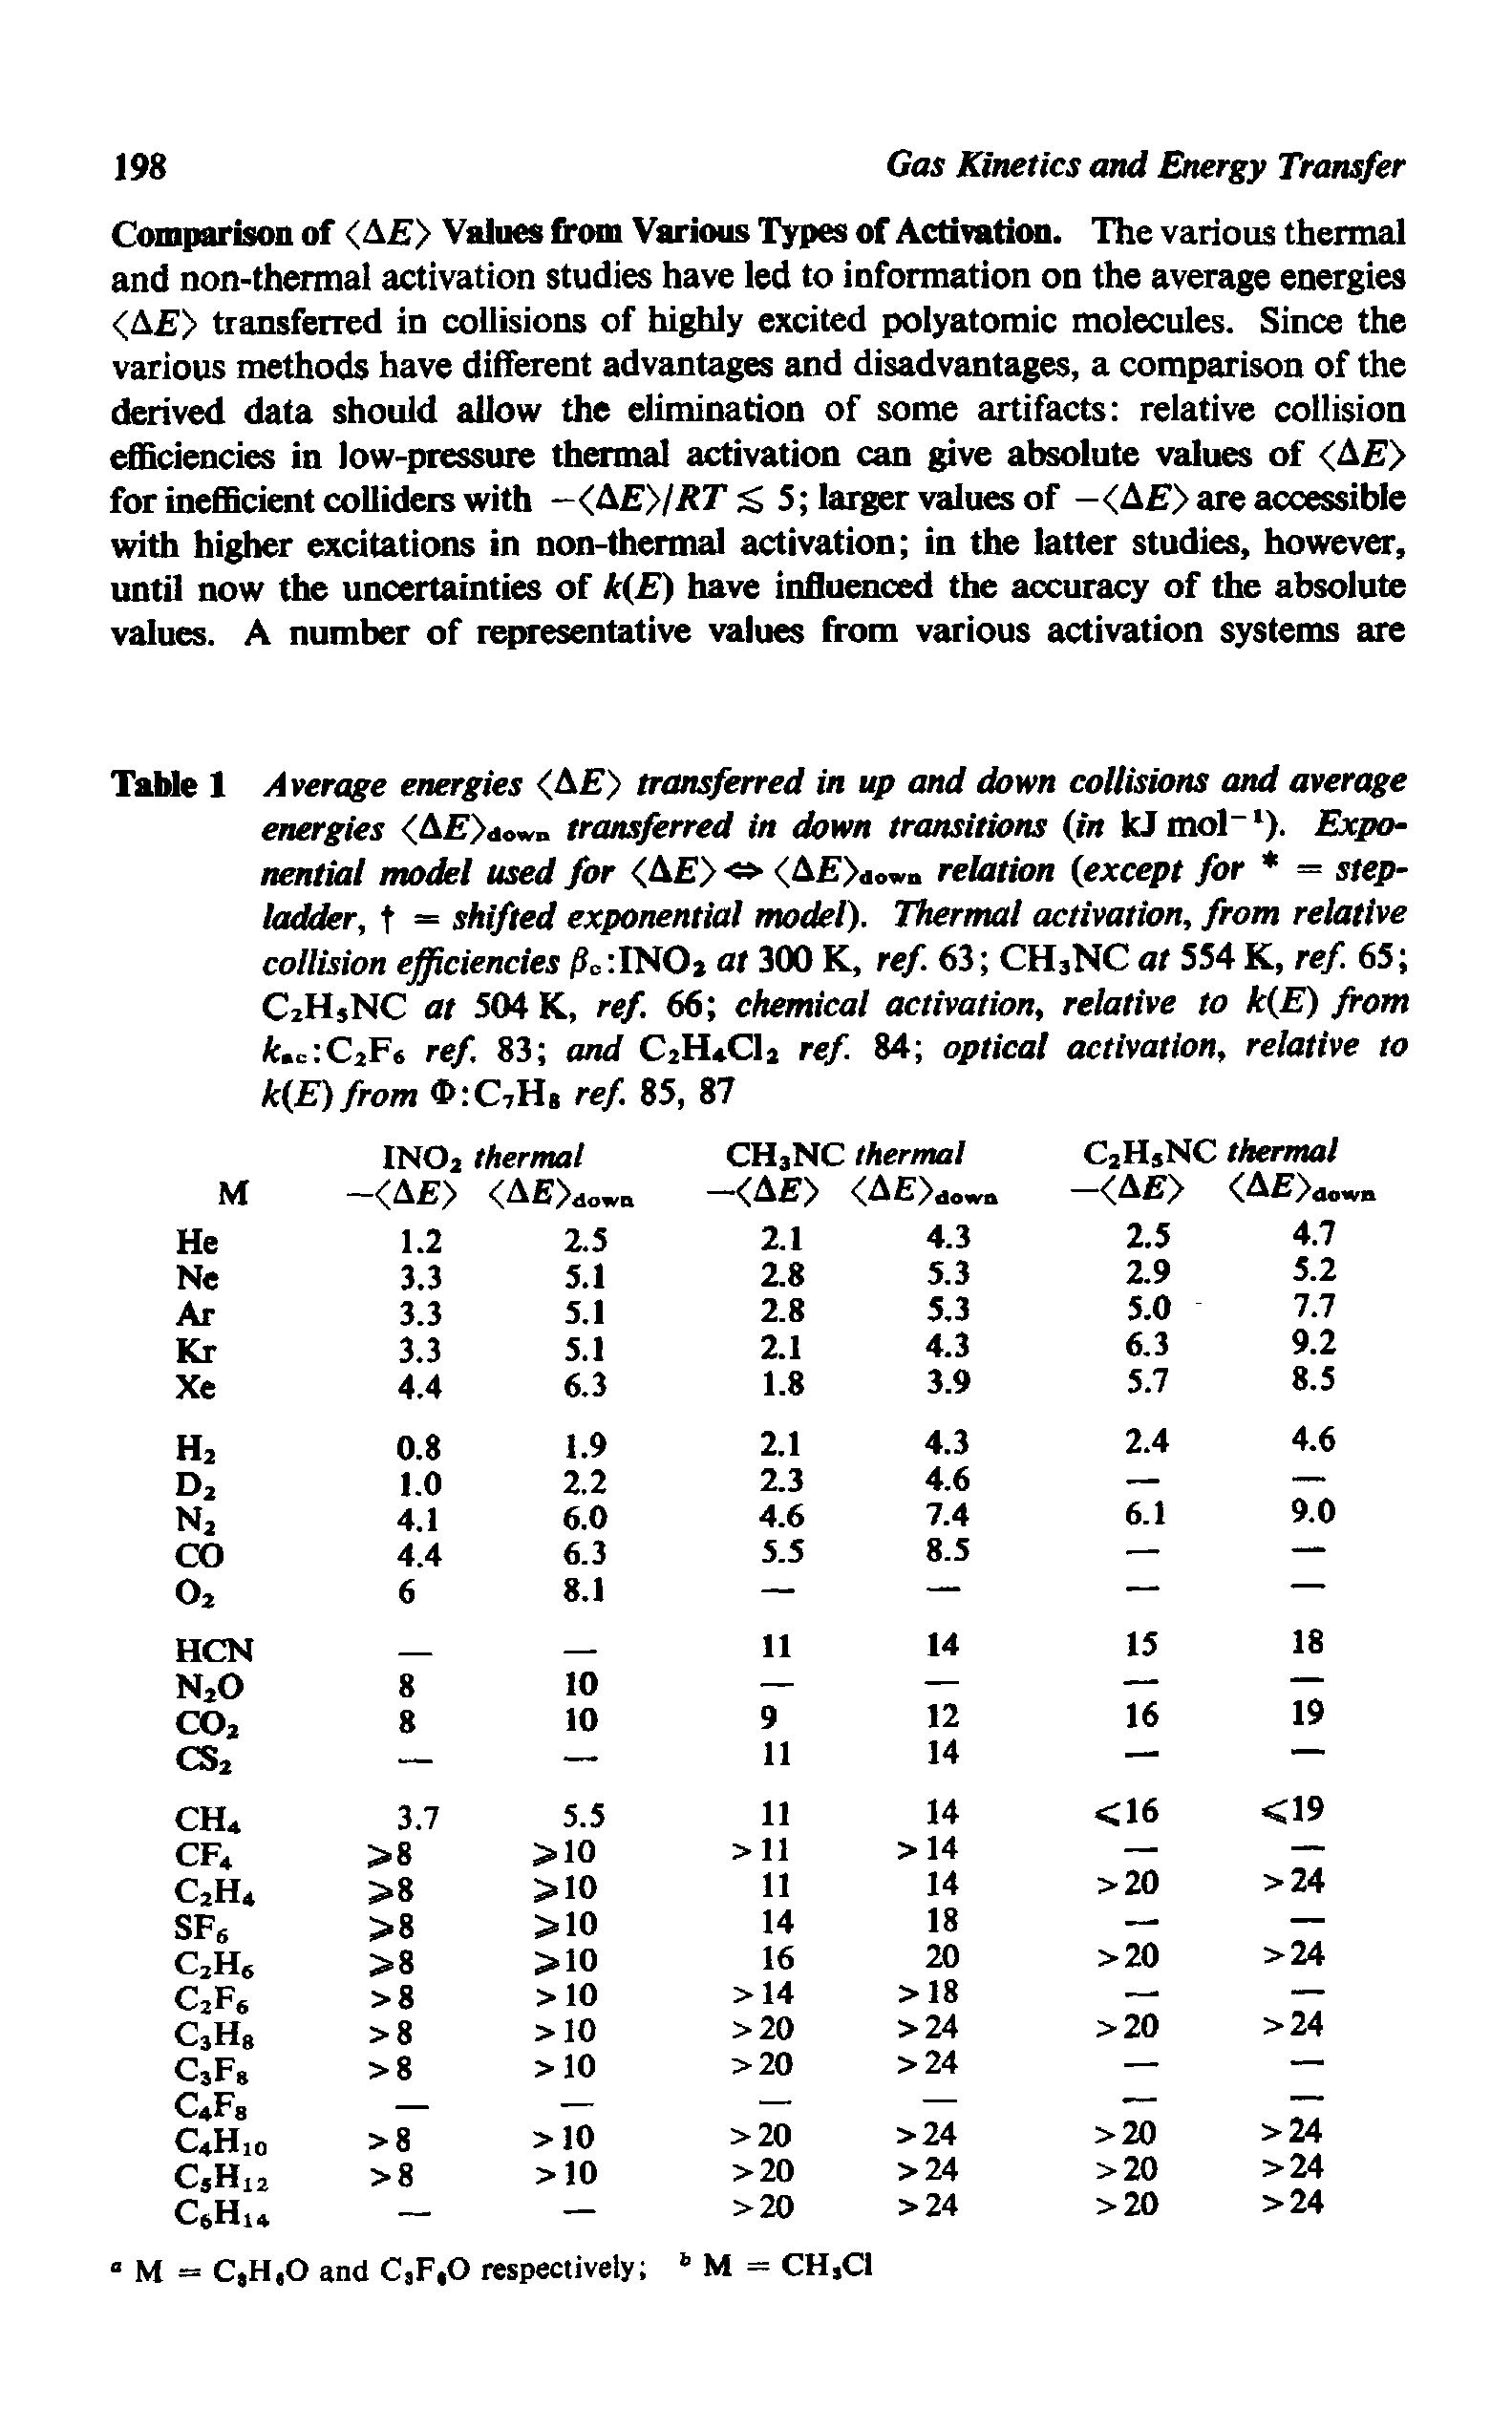 Table 1 Average energies <A > transferred in up and down collisions and average energies <A >dow transferred in down transitions in kJ mol ). Exponential model used for < A > > <A >d.wn relation except for = step-ladder, t = shifted exponential model). Thermal activation, from relative collision efficiencies at 300 K, ref. 63 CHjNC at 554 K, ref. 65 ...